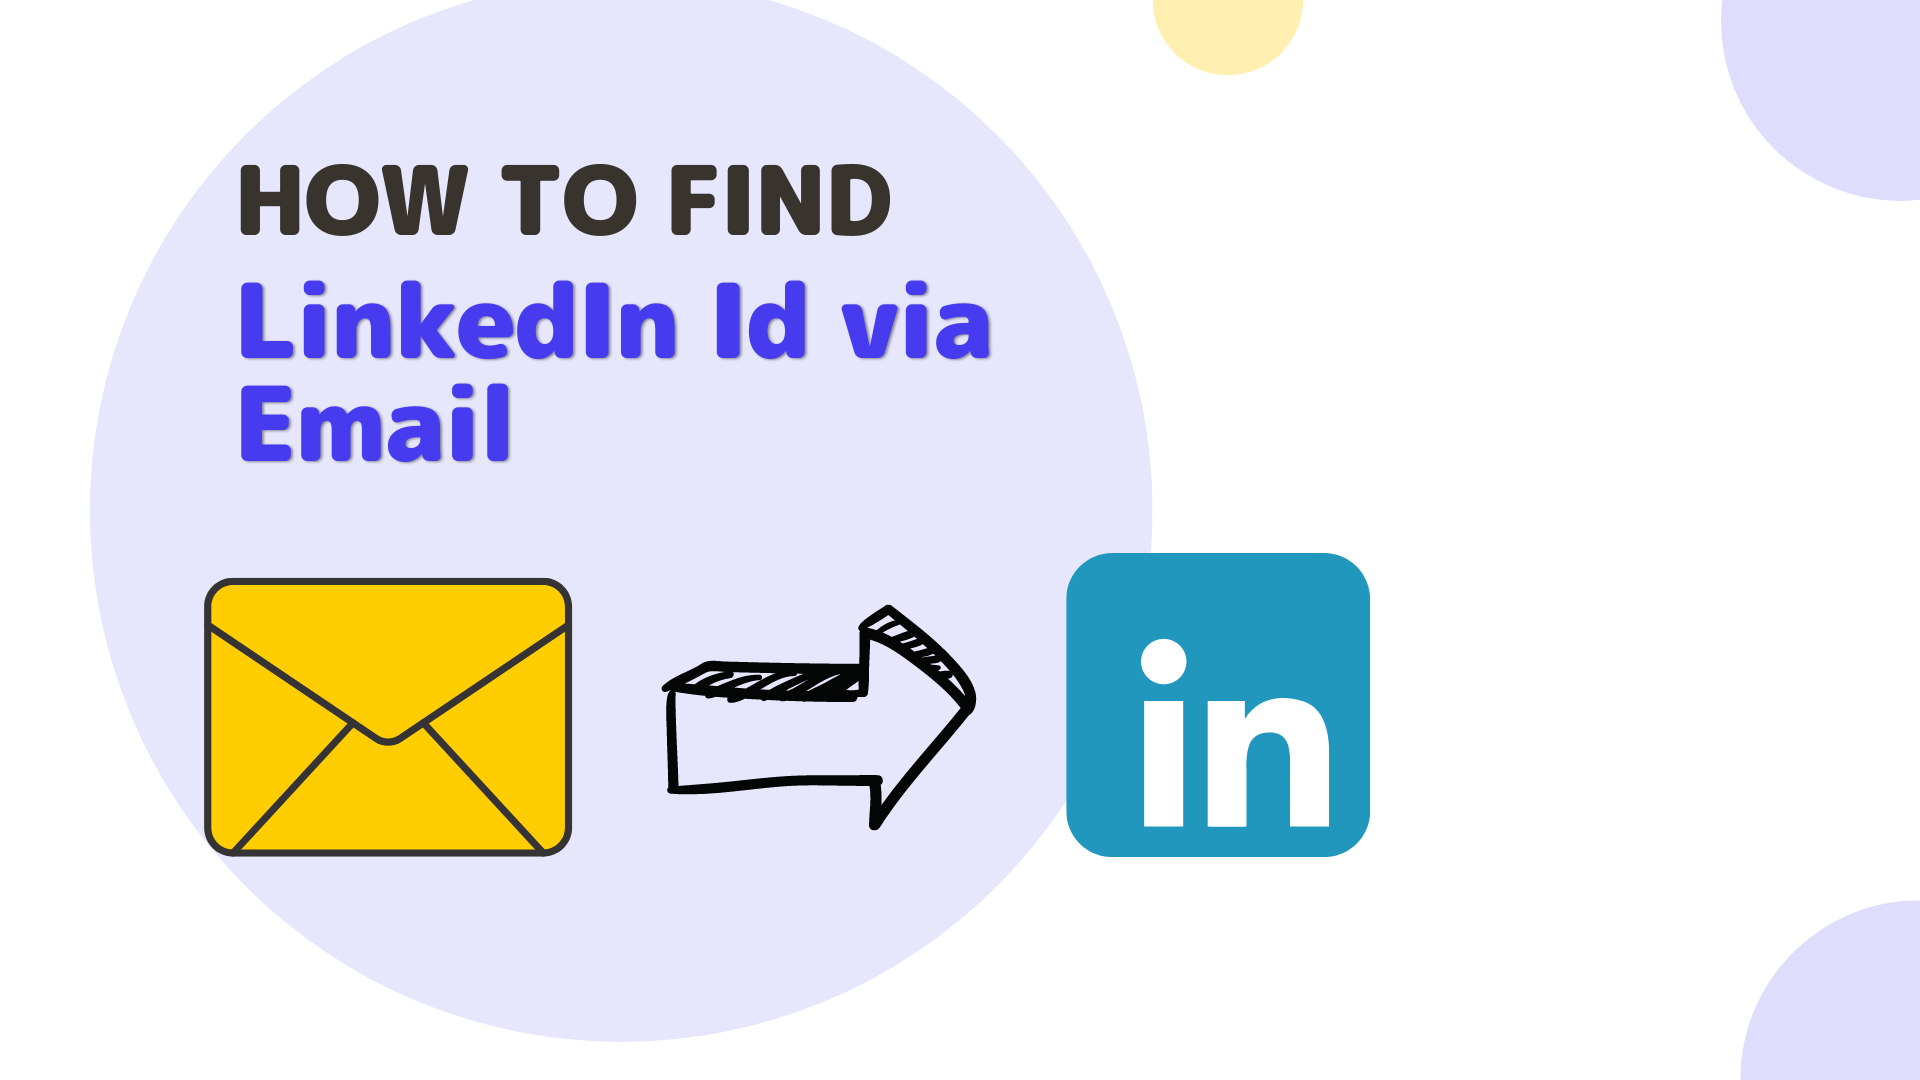 How To Find LinkedIn ID with Email Address in Bulk